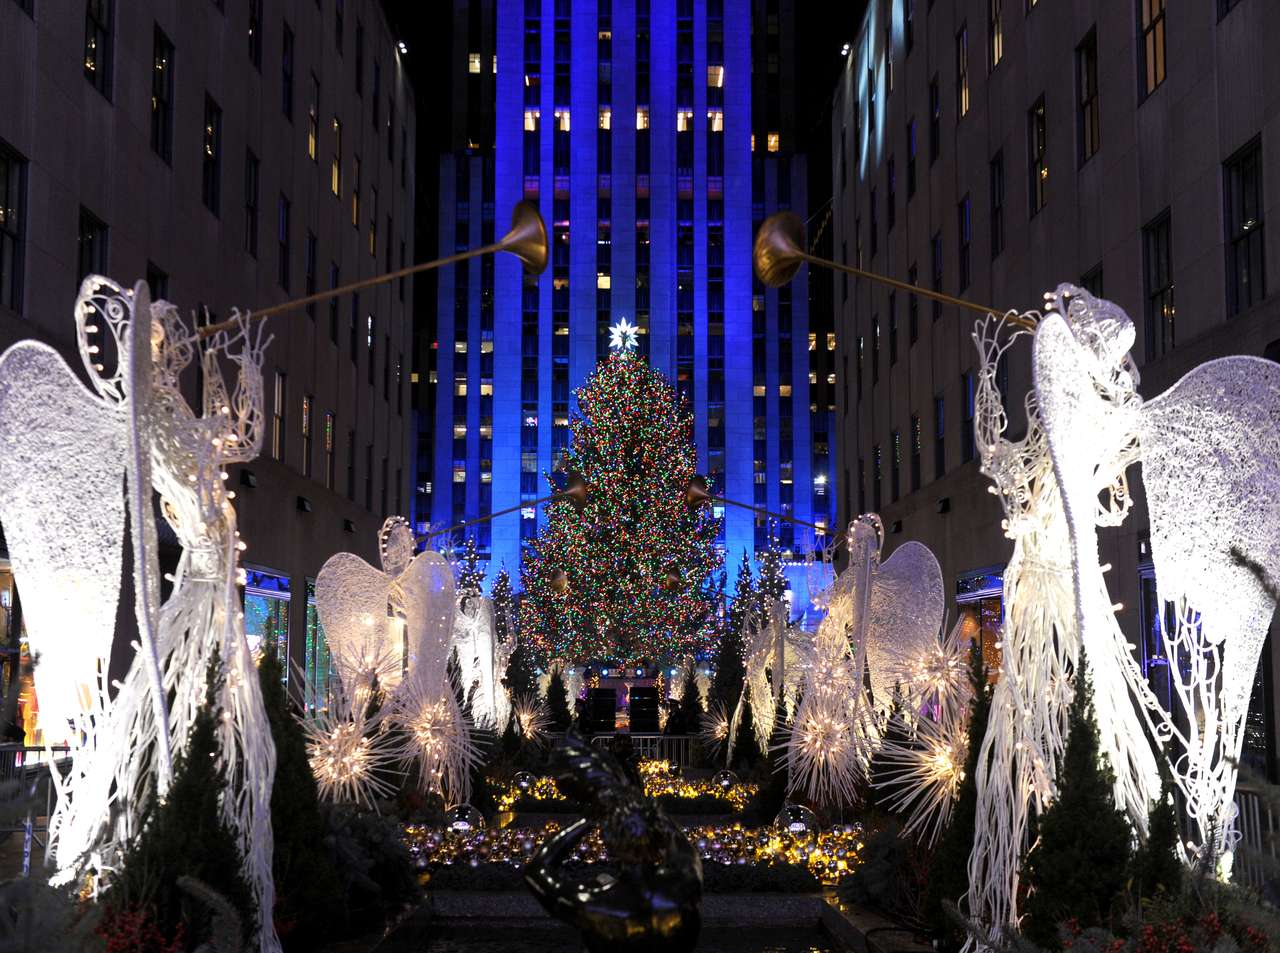 Five Exquisite Christmas Trees Found in Well-Known Cities